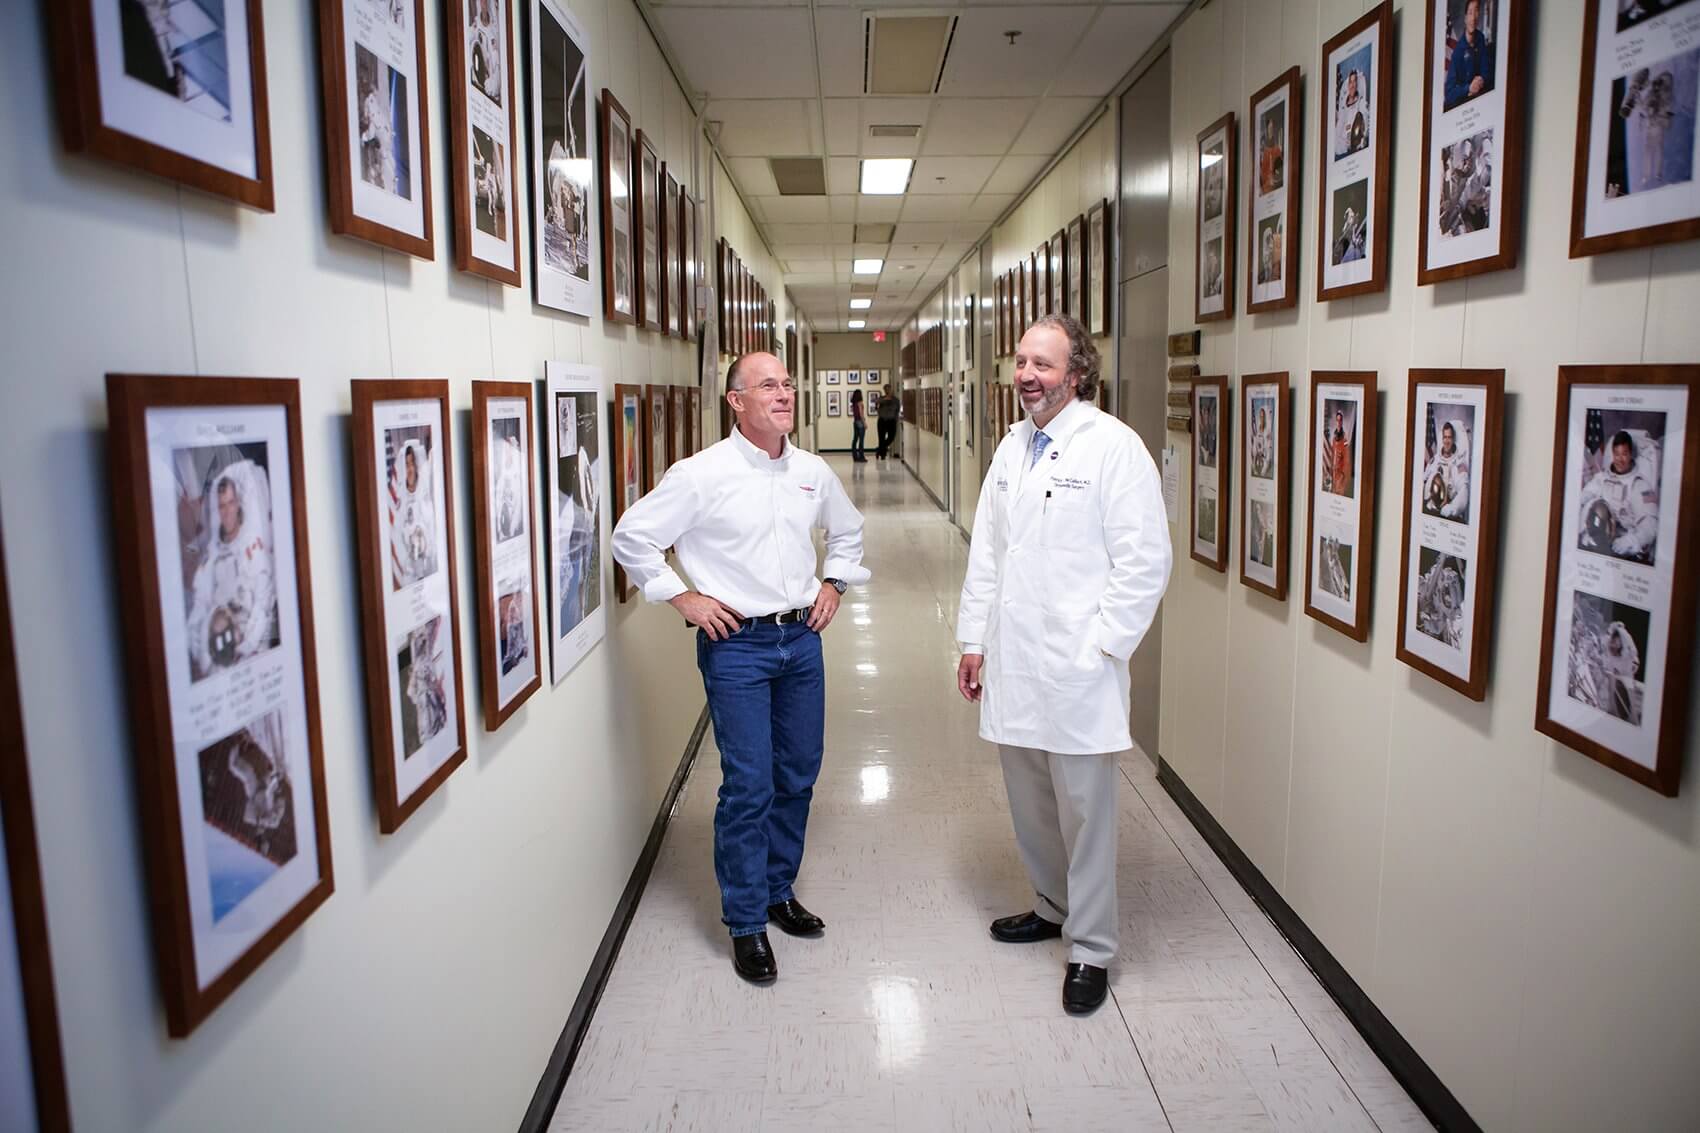 Rick Scheuring, D.O., flight surgeon for NASA and the Johnson Space Center, and Patrick McCulloch, M.D., orthopedic surgeon at Houston Methodist Hospital, walk the halls at NASA after a recent Wednesday clinic.